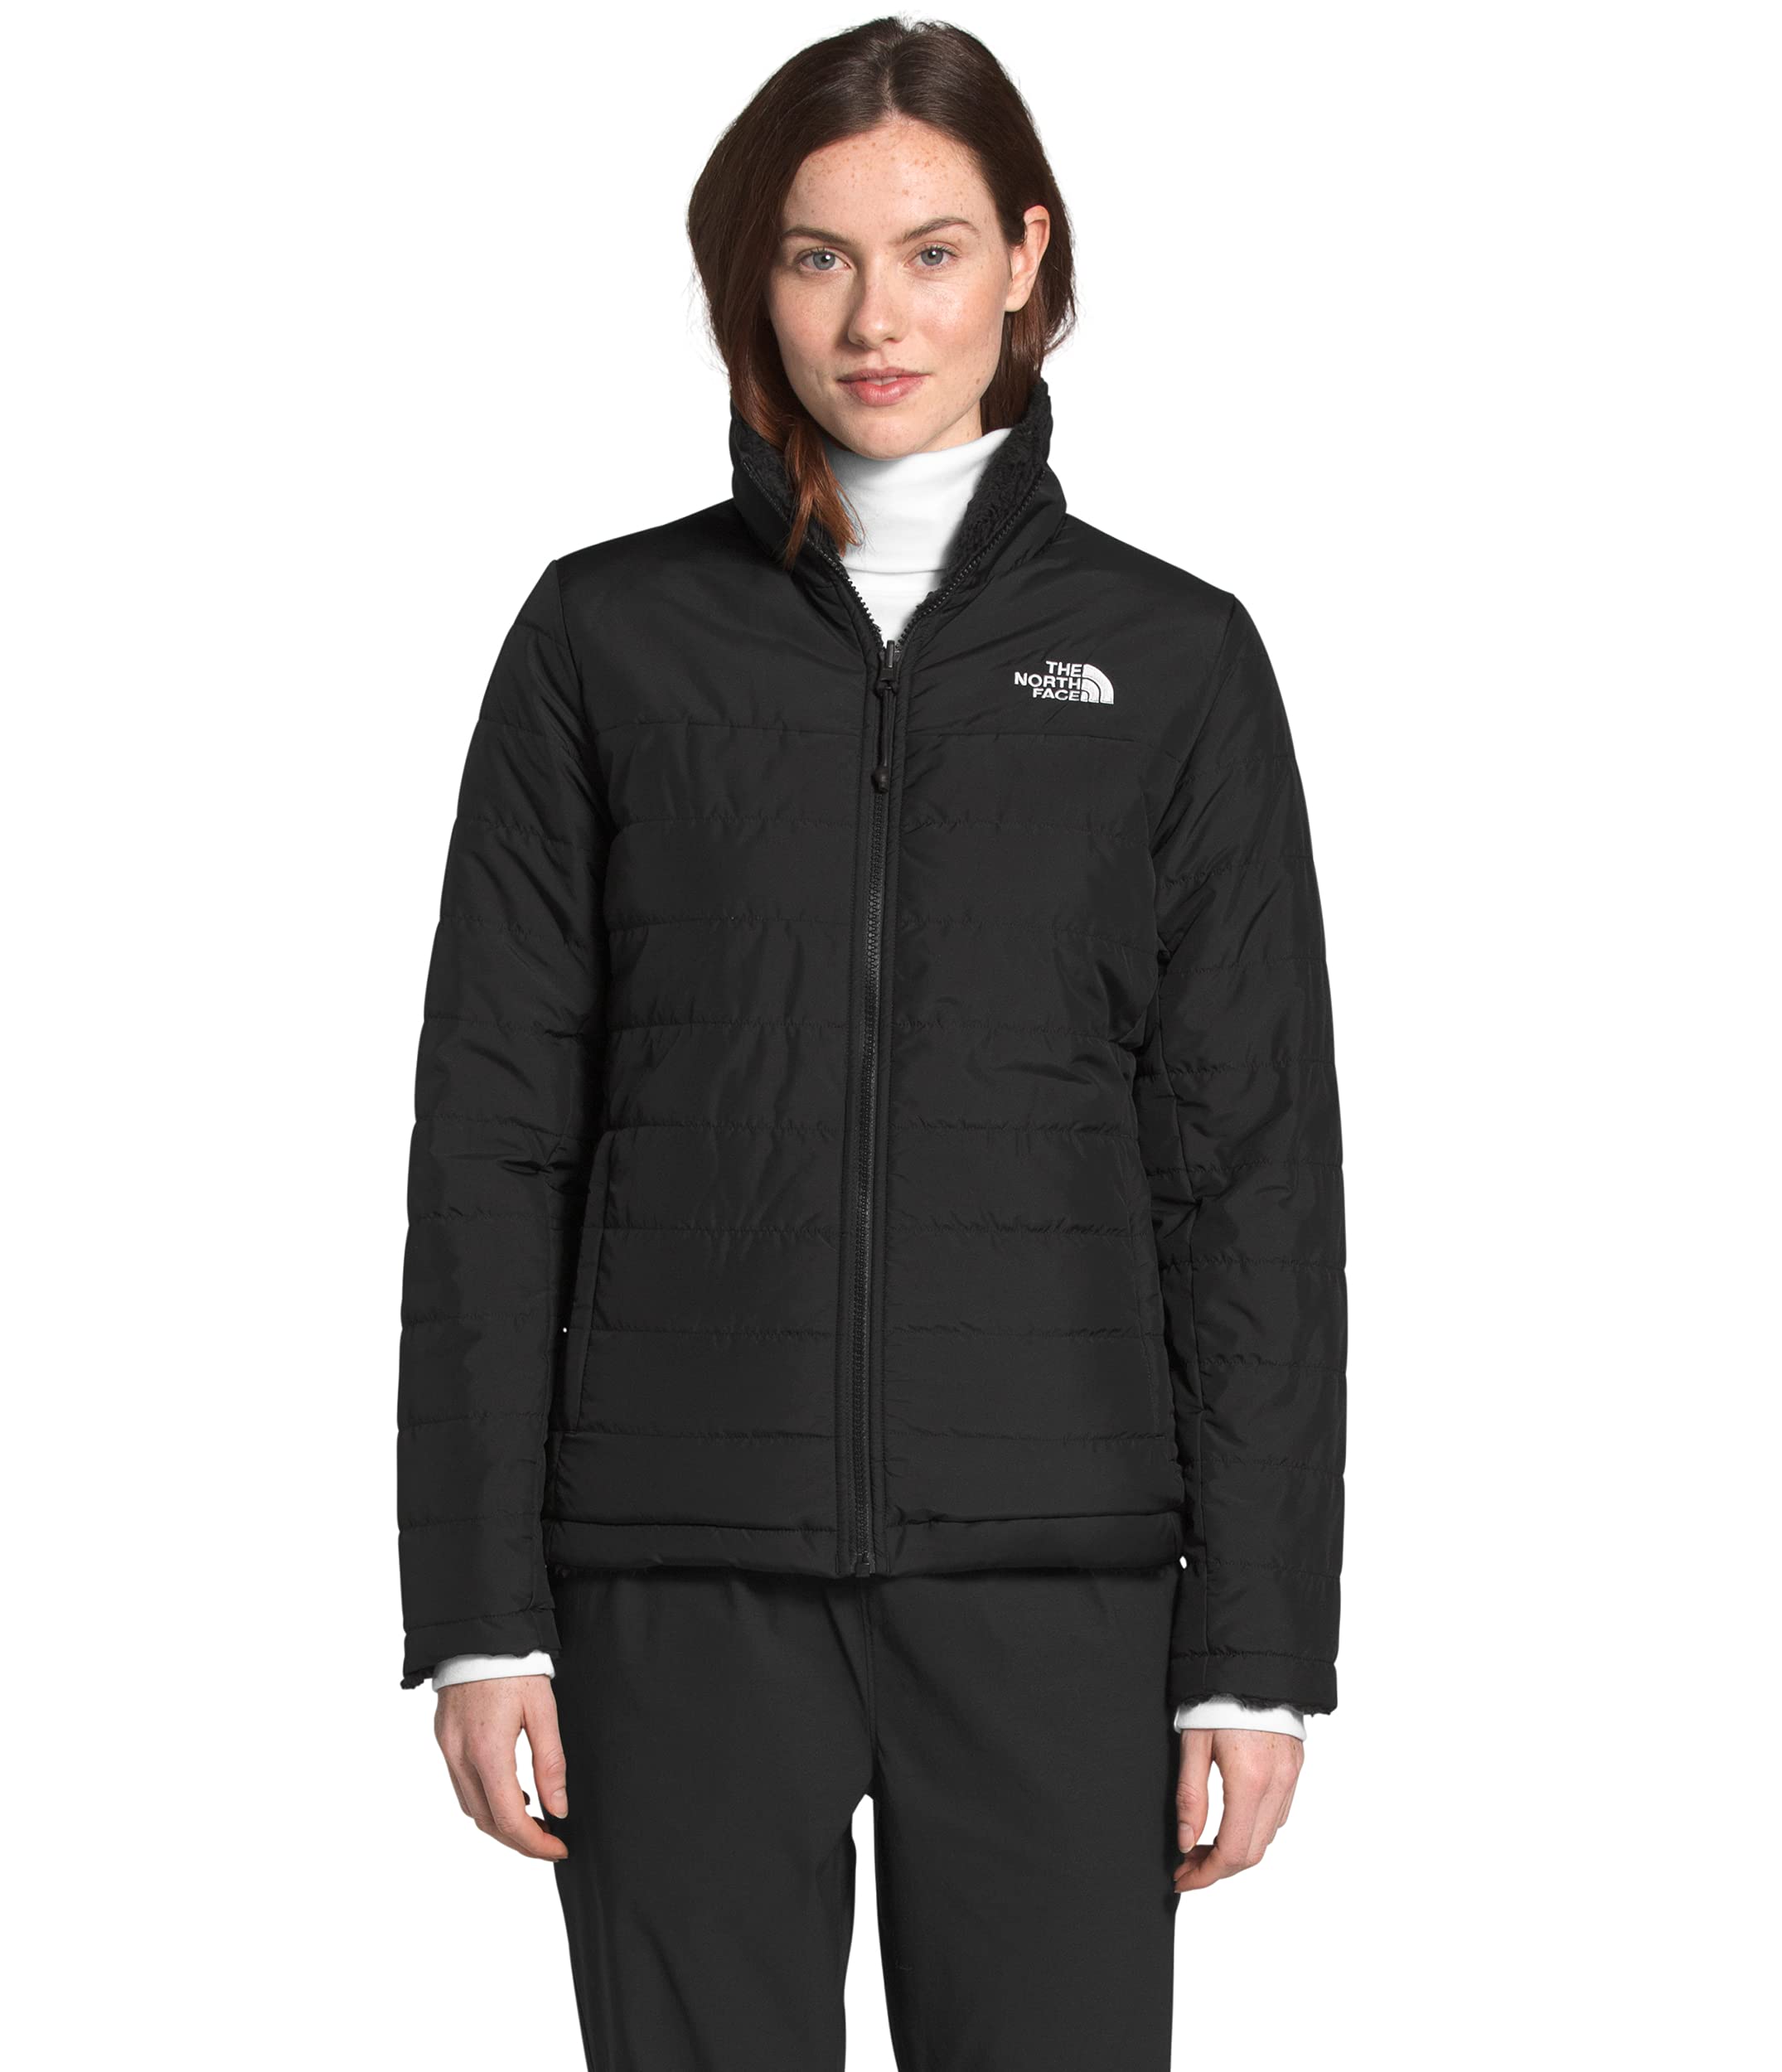 THE NORTH FACE Women's Mossbud Insulated Reversible Jacket X-Small